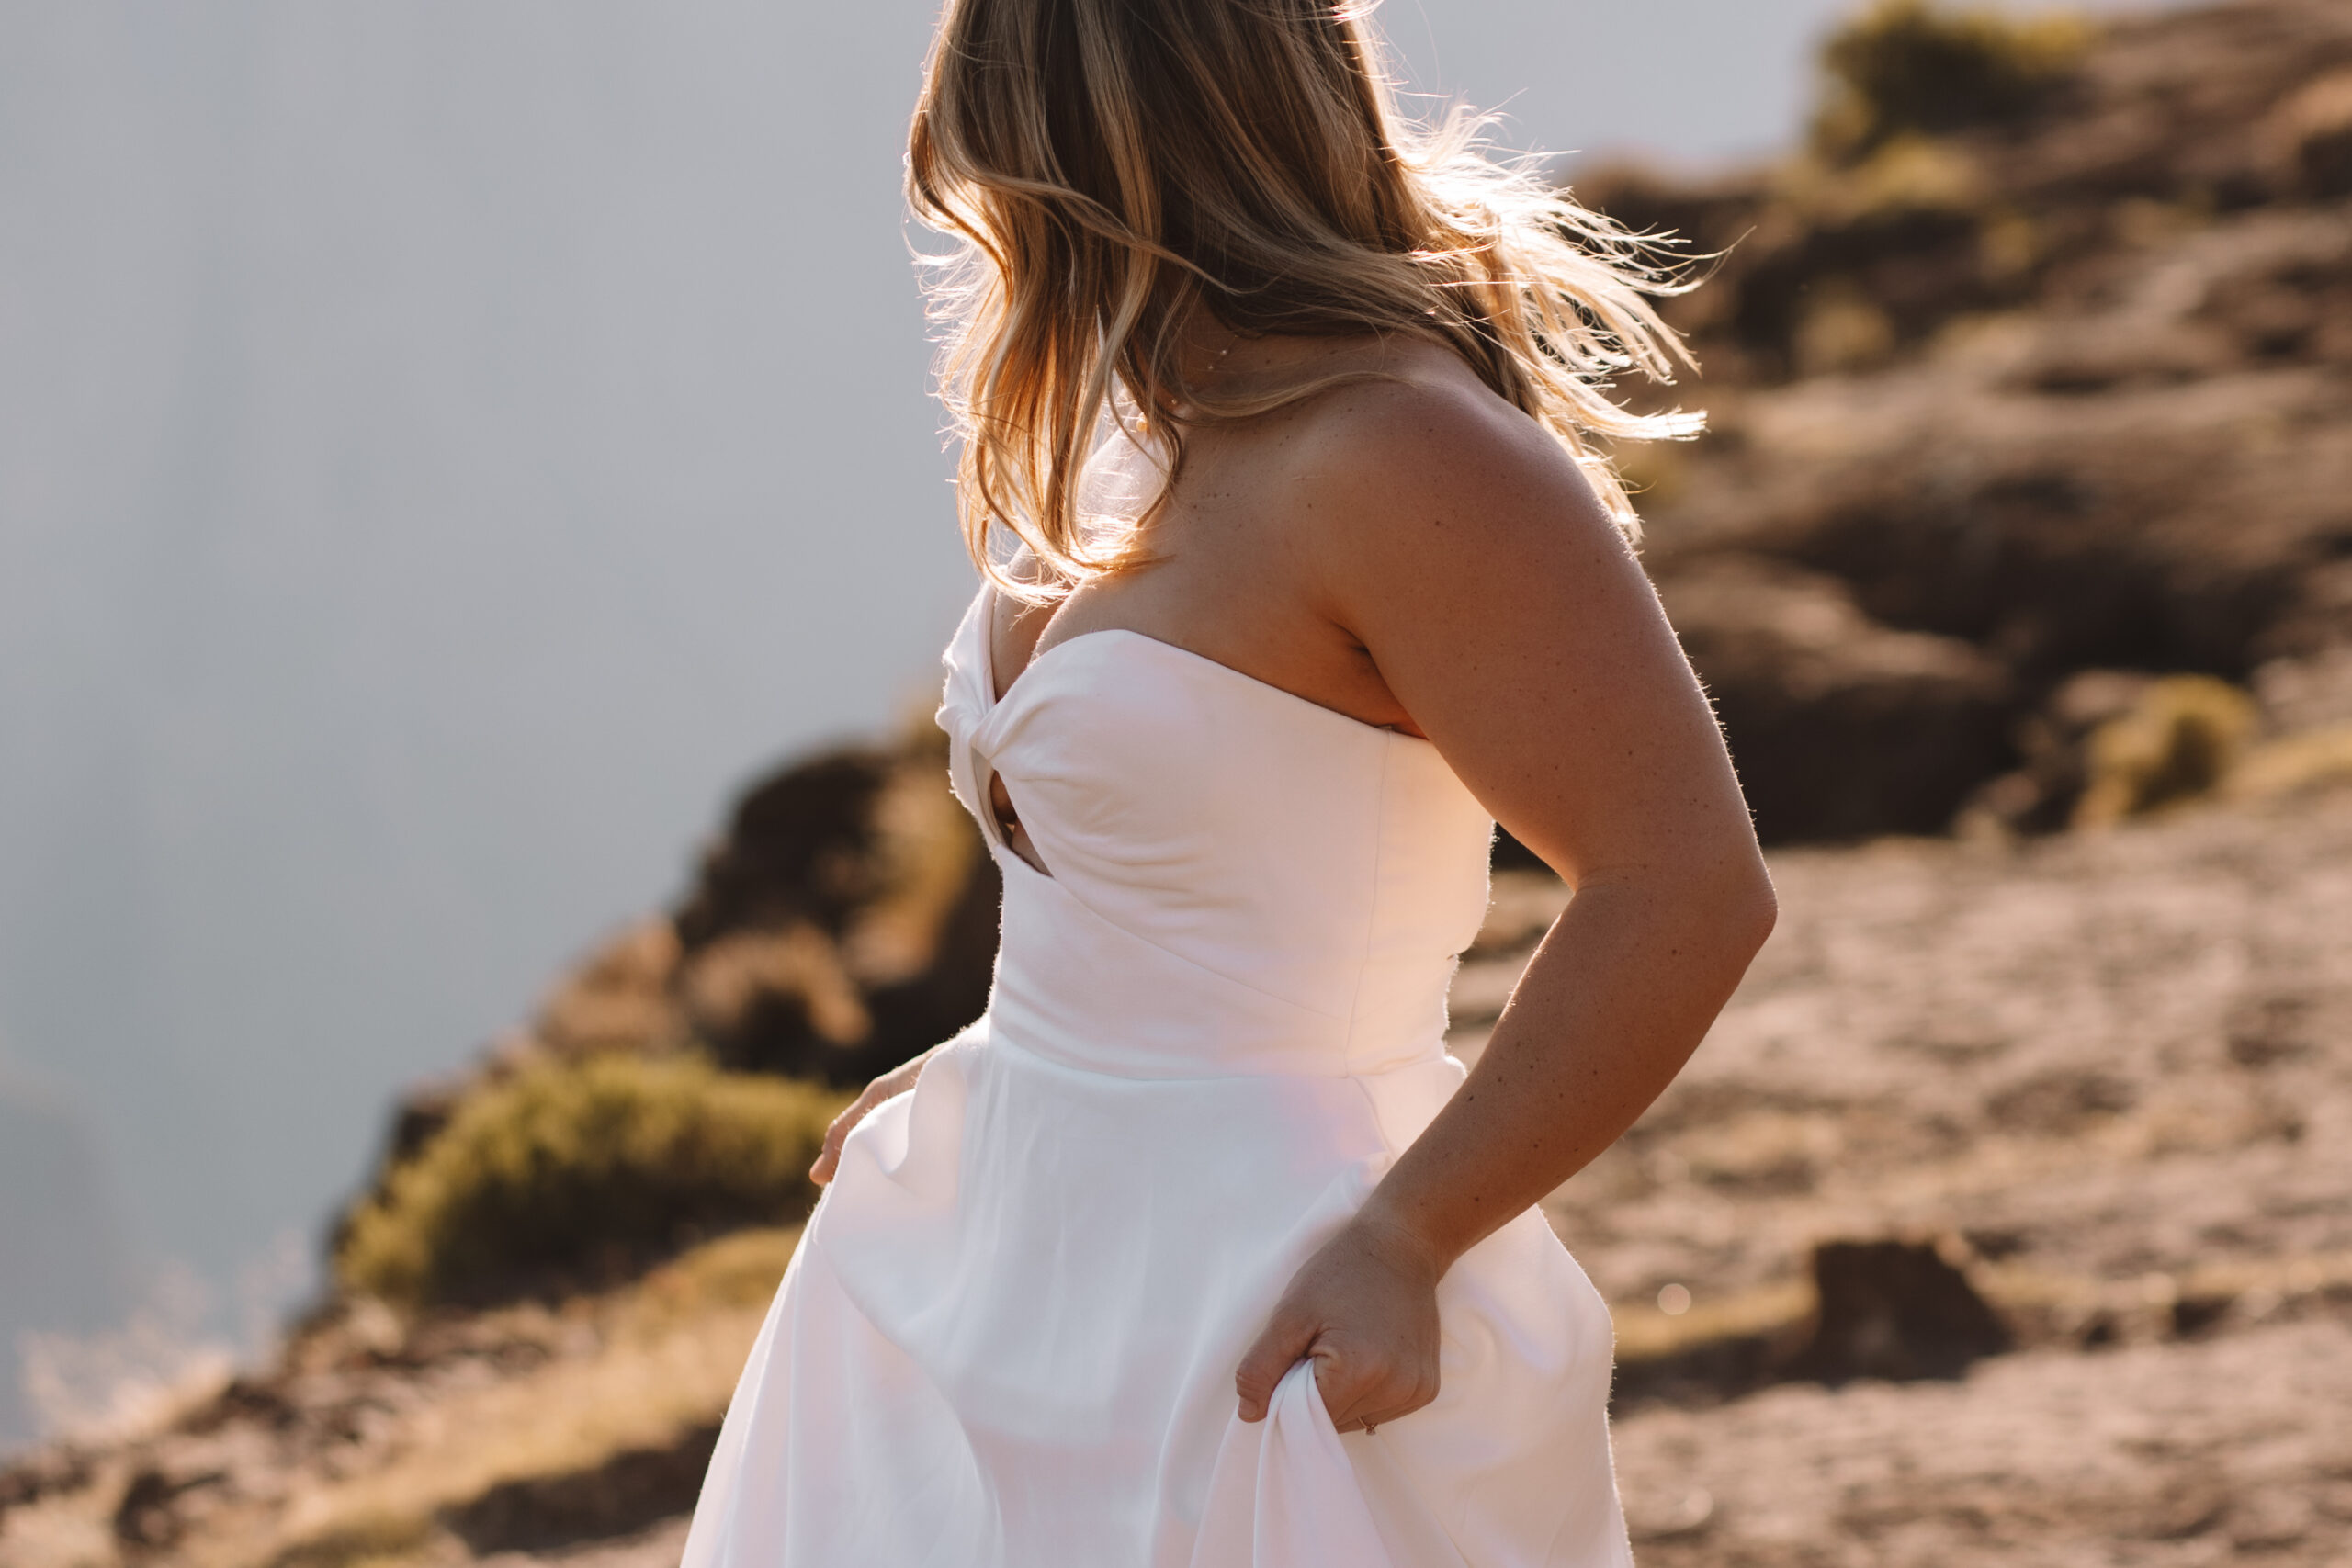 Healthy and happy bride in her plain white wedding dress on a mountain